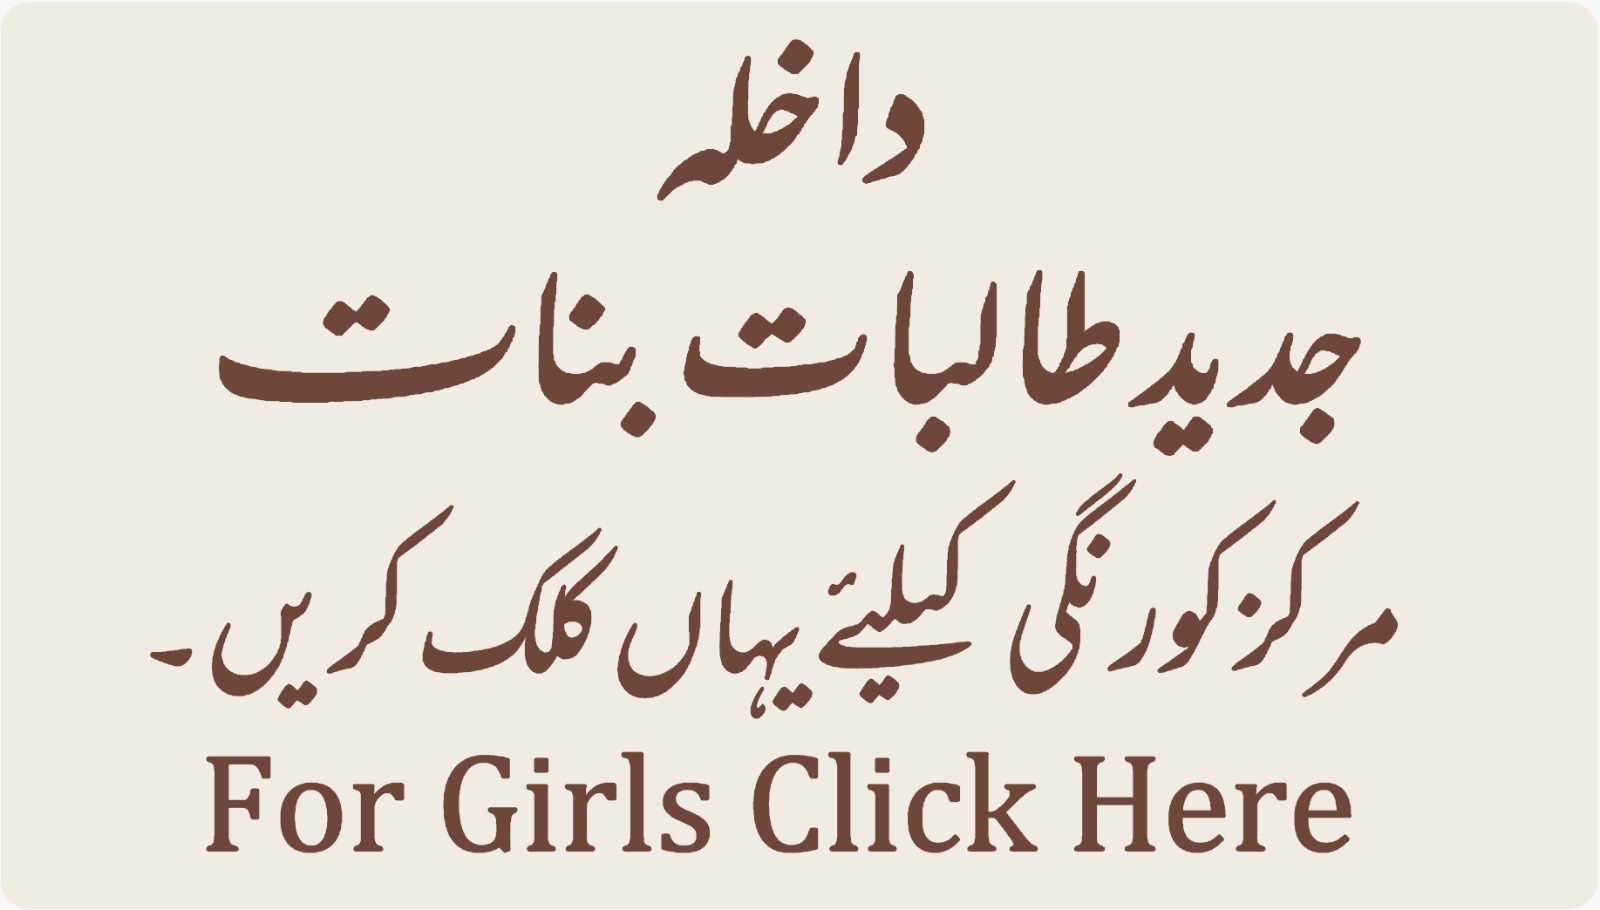 FOR GIRLS CLICK HERE